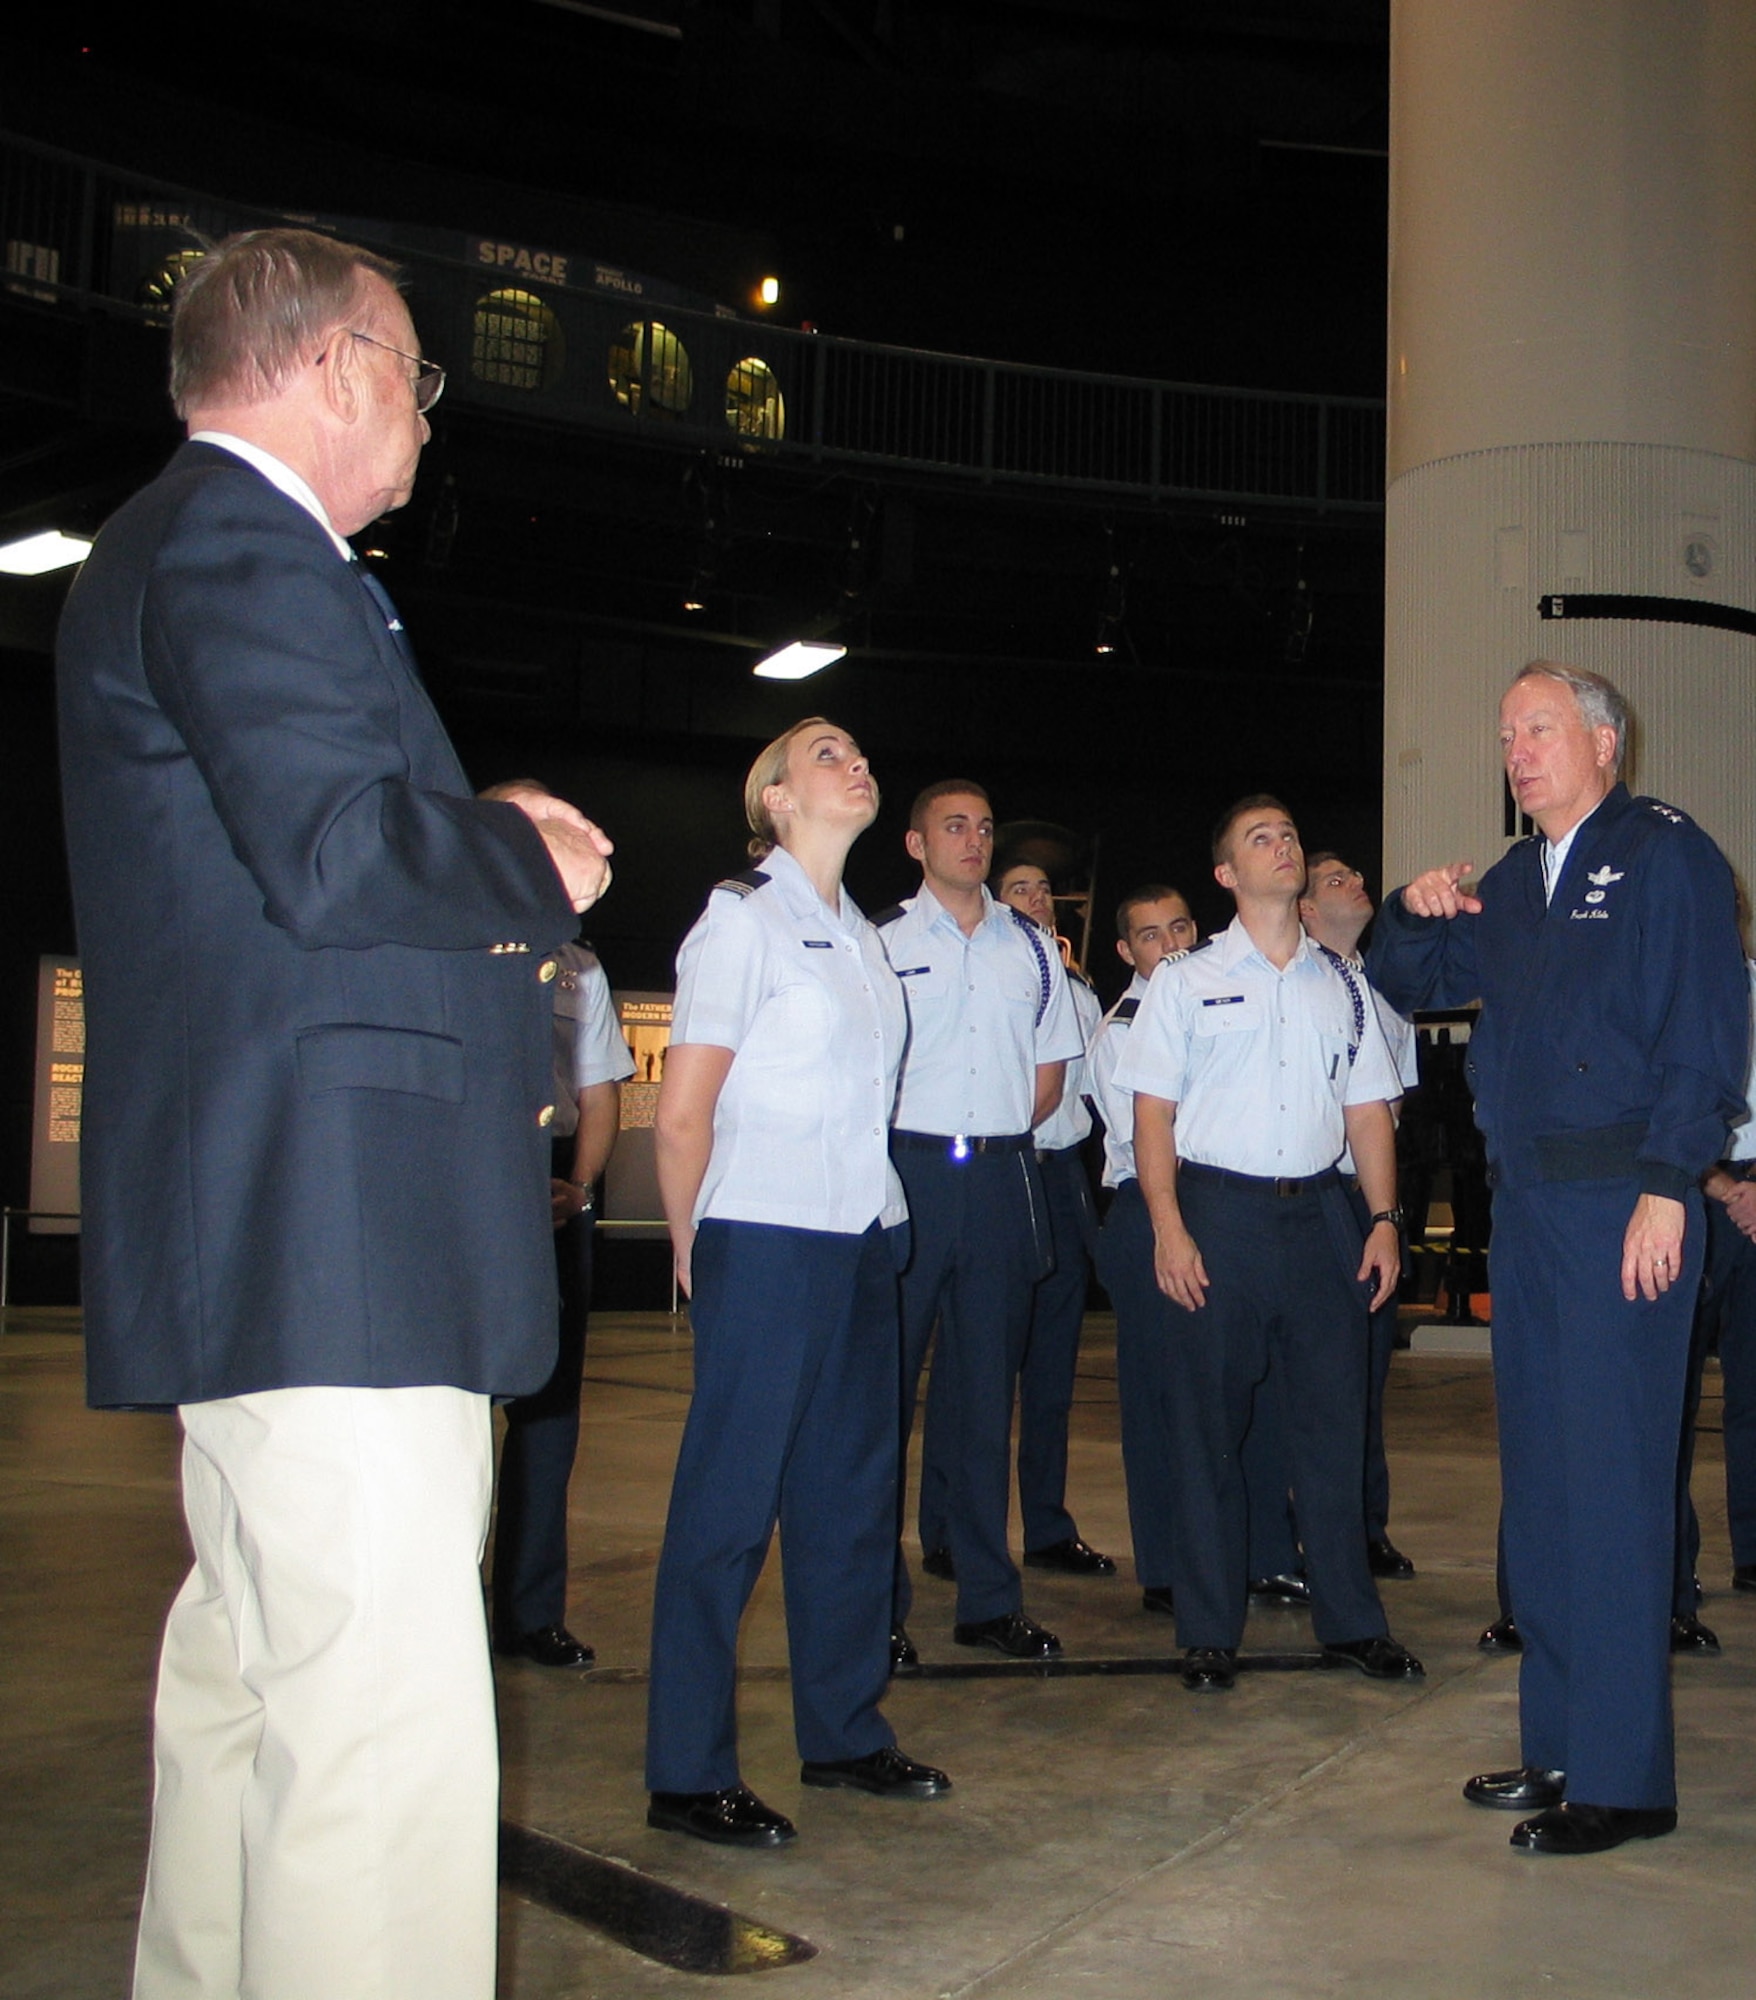 Lt. Gen. Frank Klotz, vice commander of Air Force Space Command, discusses the strategic deterrence role intercontinental ballistic missiles played during the Cold War to cadets of Air Force ROTC Detachment 643, Wright State University, Oct. 7 at the National Museum of the U.S. Air Force at Wright-Patterson Air Force Base, Ohio. Retired Maj. Gen. Charlie Cooper (left), museum volunteer escorted the group. (U.S. Air Force photo by Capt. Johnny Rea)